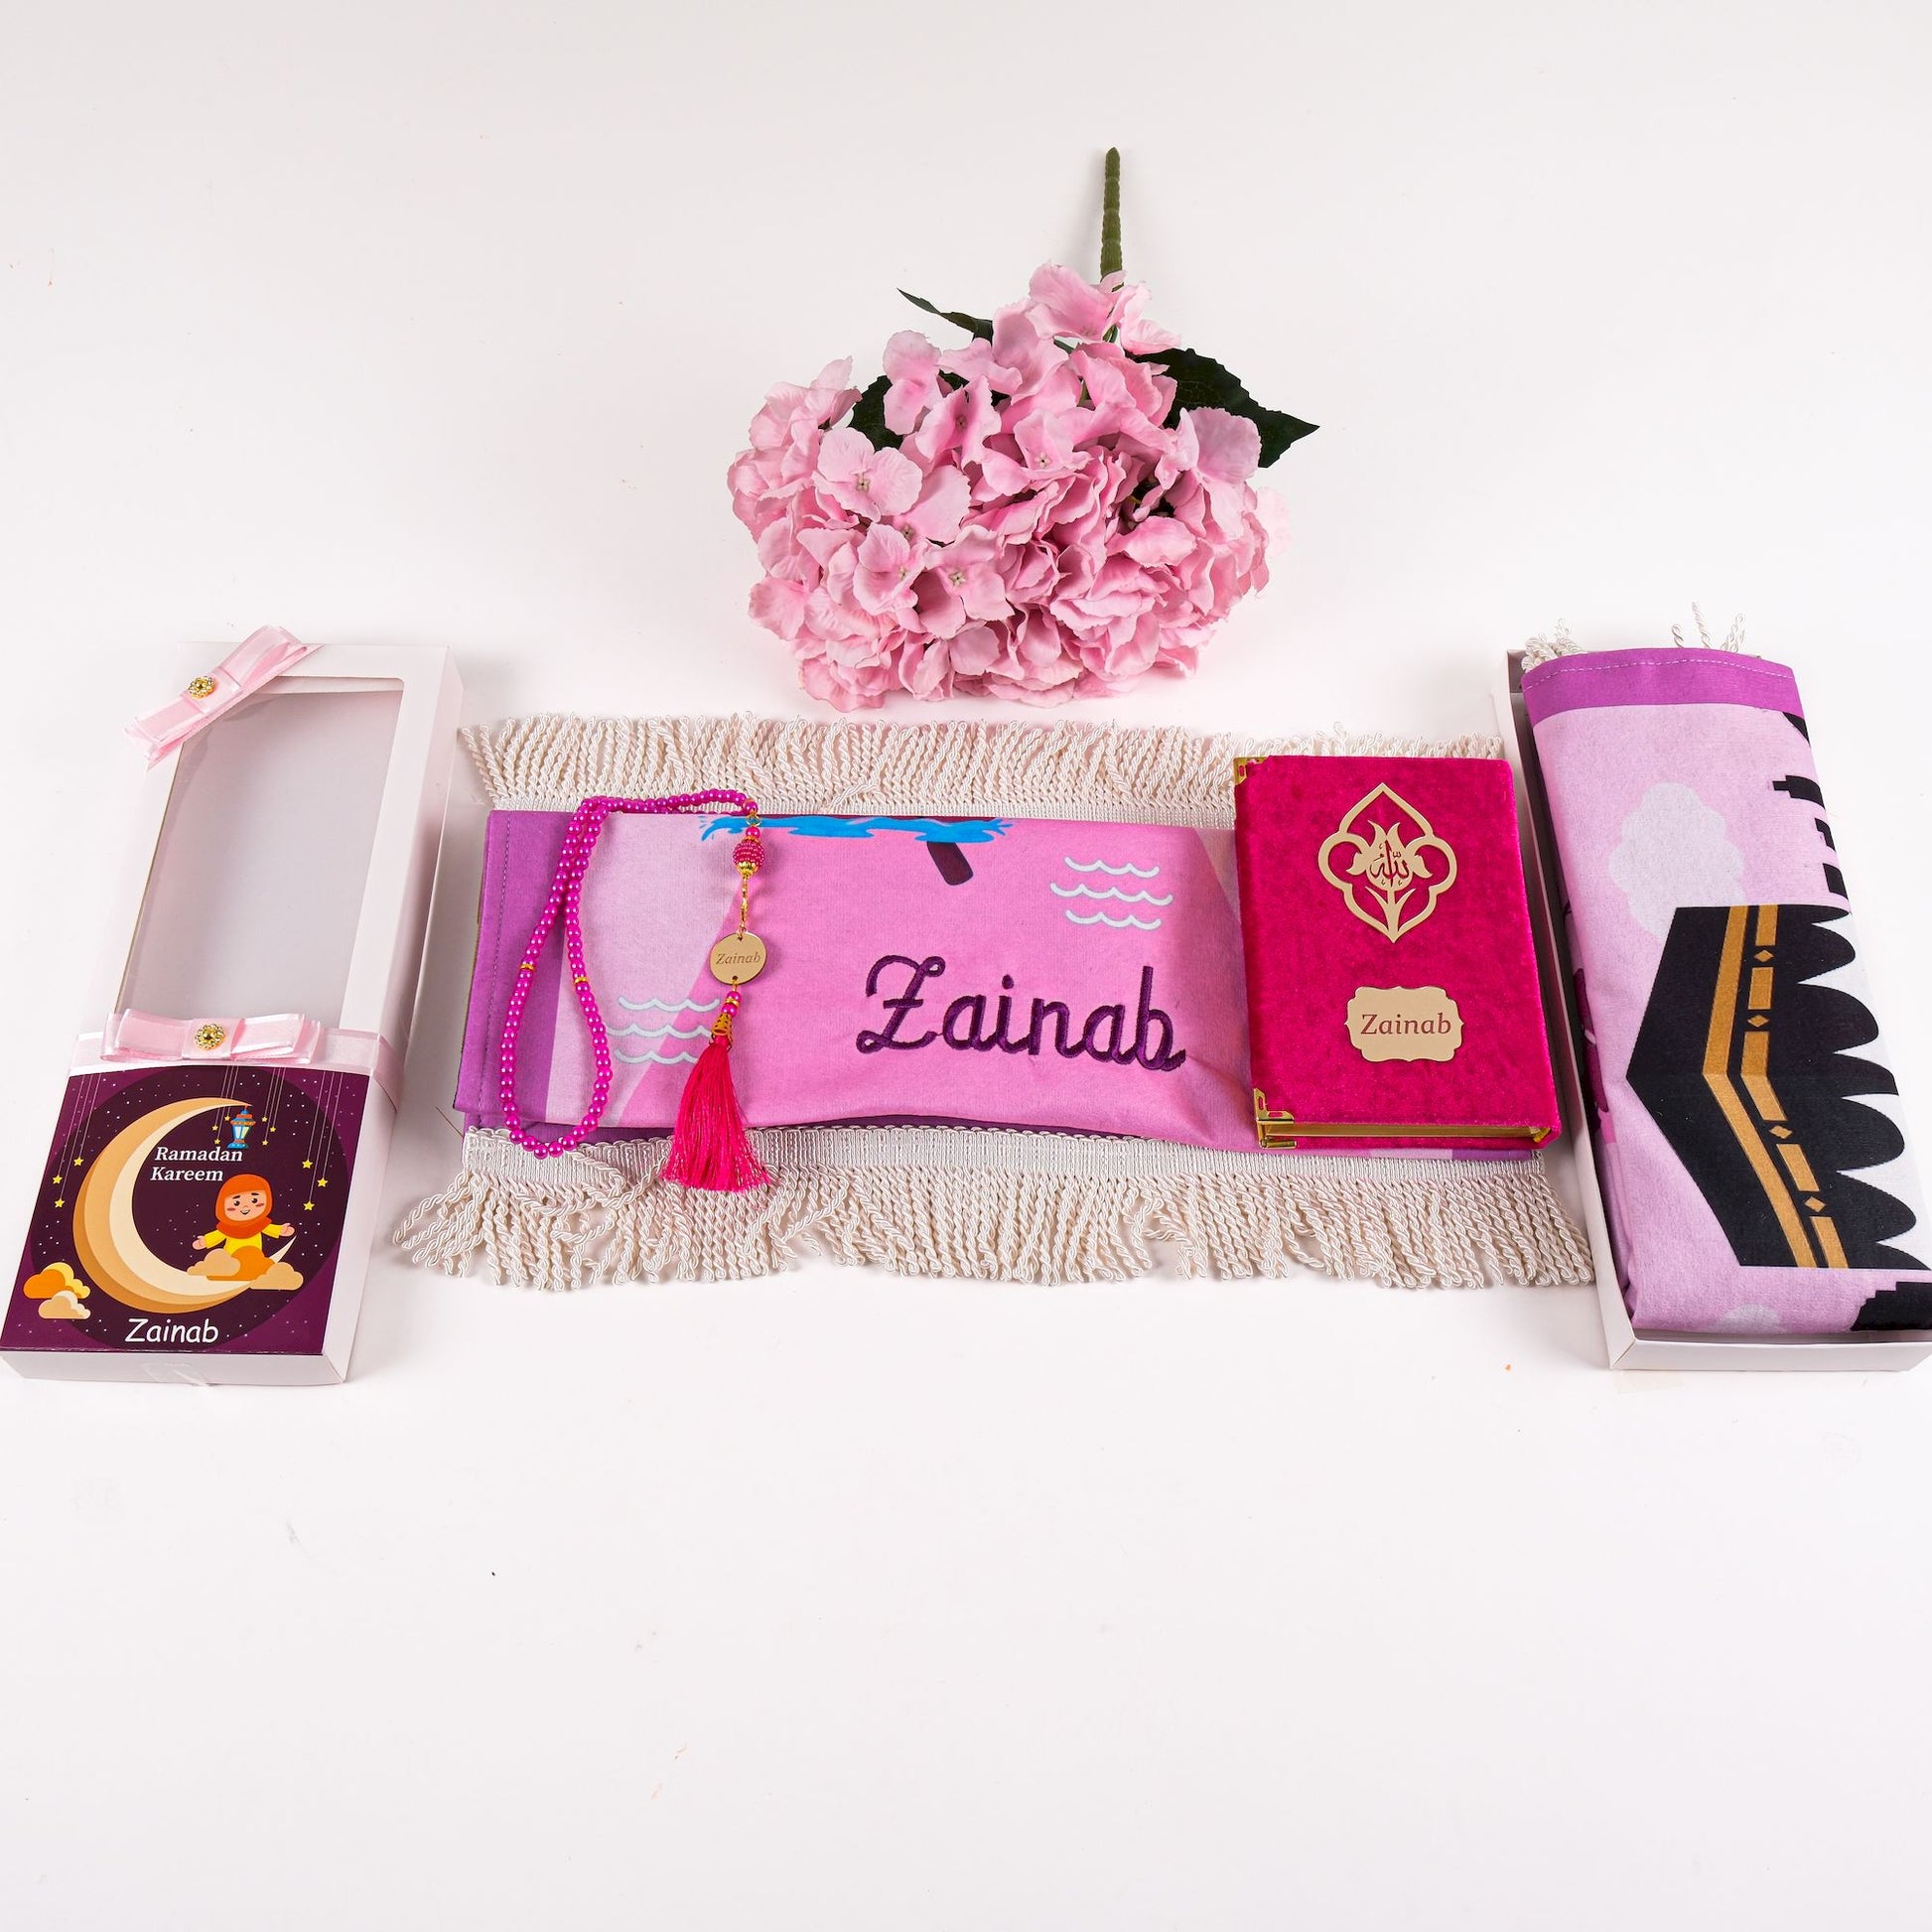 Personalized Soft Prayer Mat for Girls Quran Tasbeeh Islamic Gift Set - Islamic Elite Favors is a handmade gift shop offering a wide variety of unique and personalized gifts for all occasions. Whether you're looking for the perfect Ramadan, Eid, Hajj, wedding gift or something special for a birthday, baby shower or anniversary, we have something for everyone. High quality, made with love.